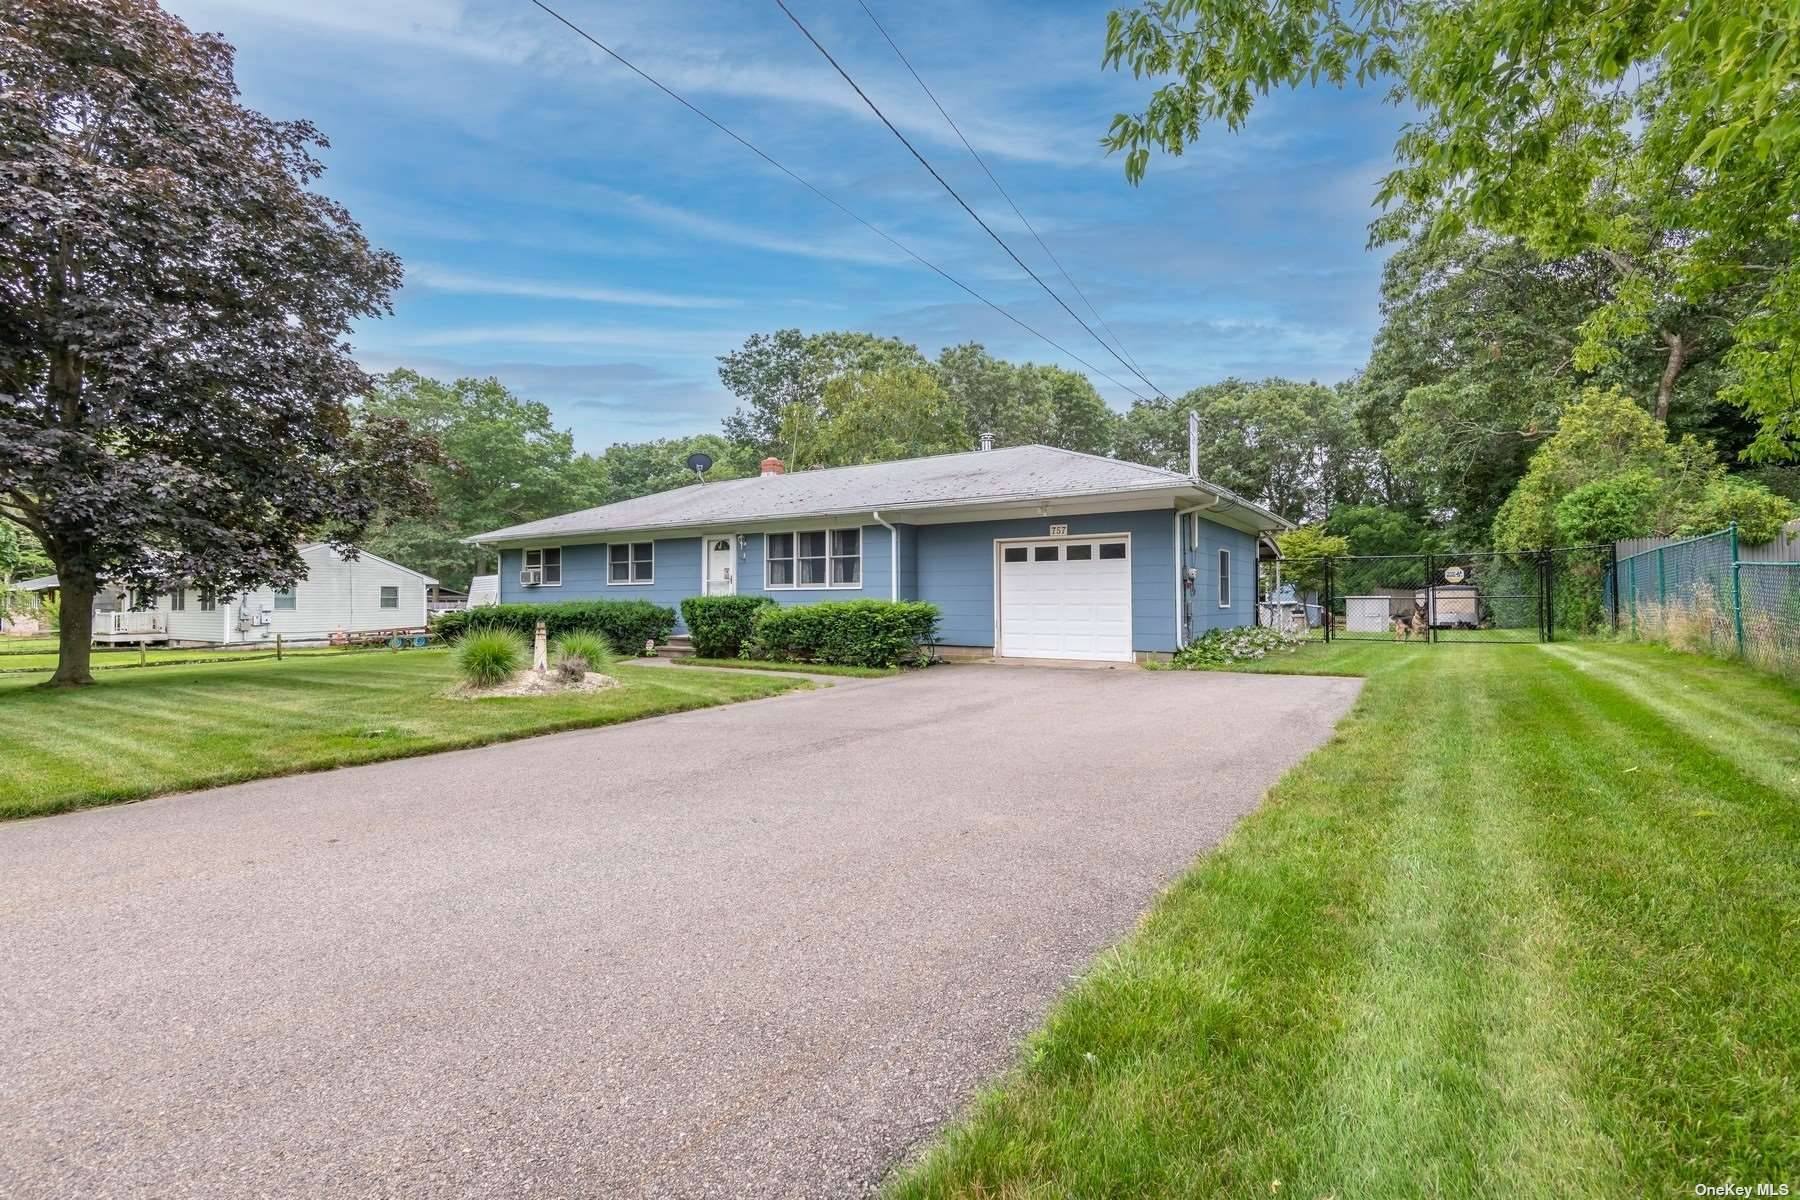 A Great, Solid Ranch with Beautiful Hardwood Floors Throughout.